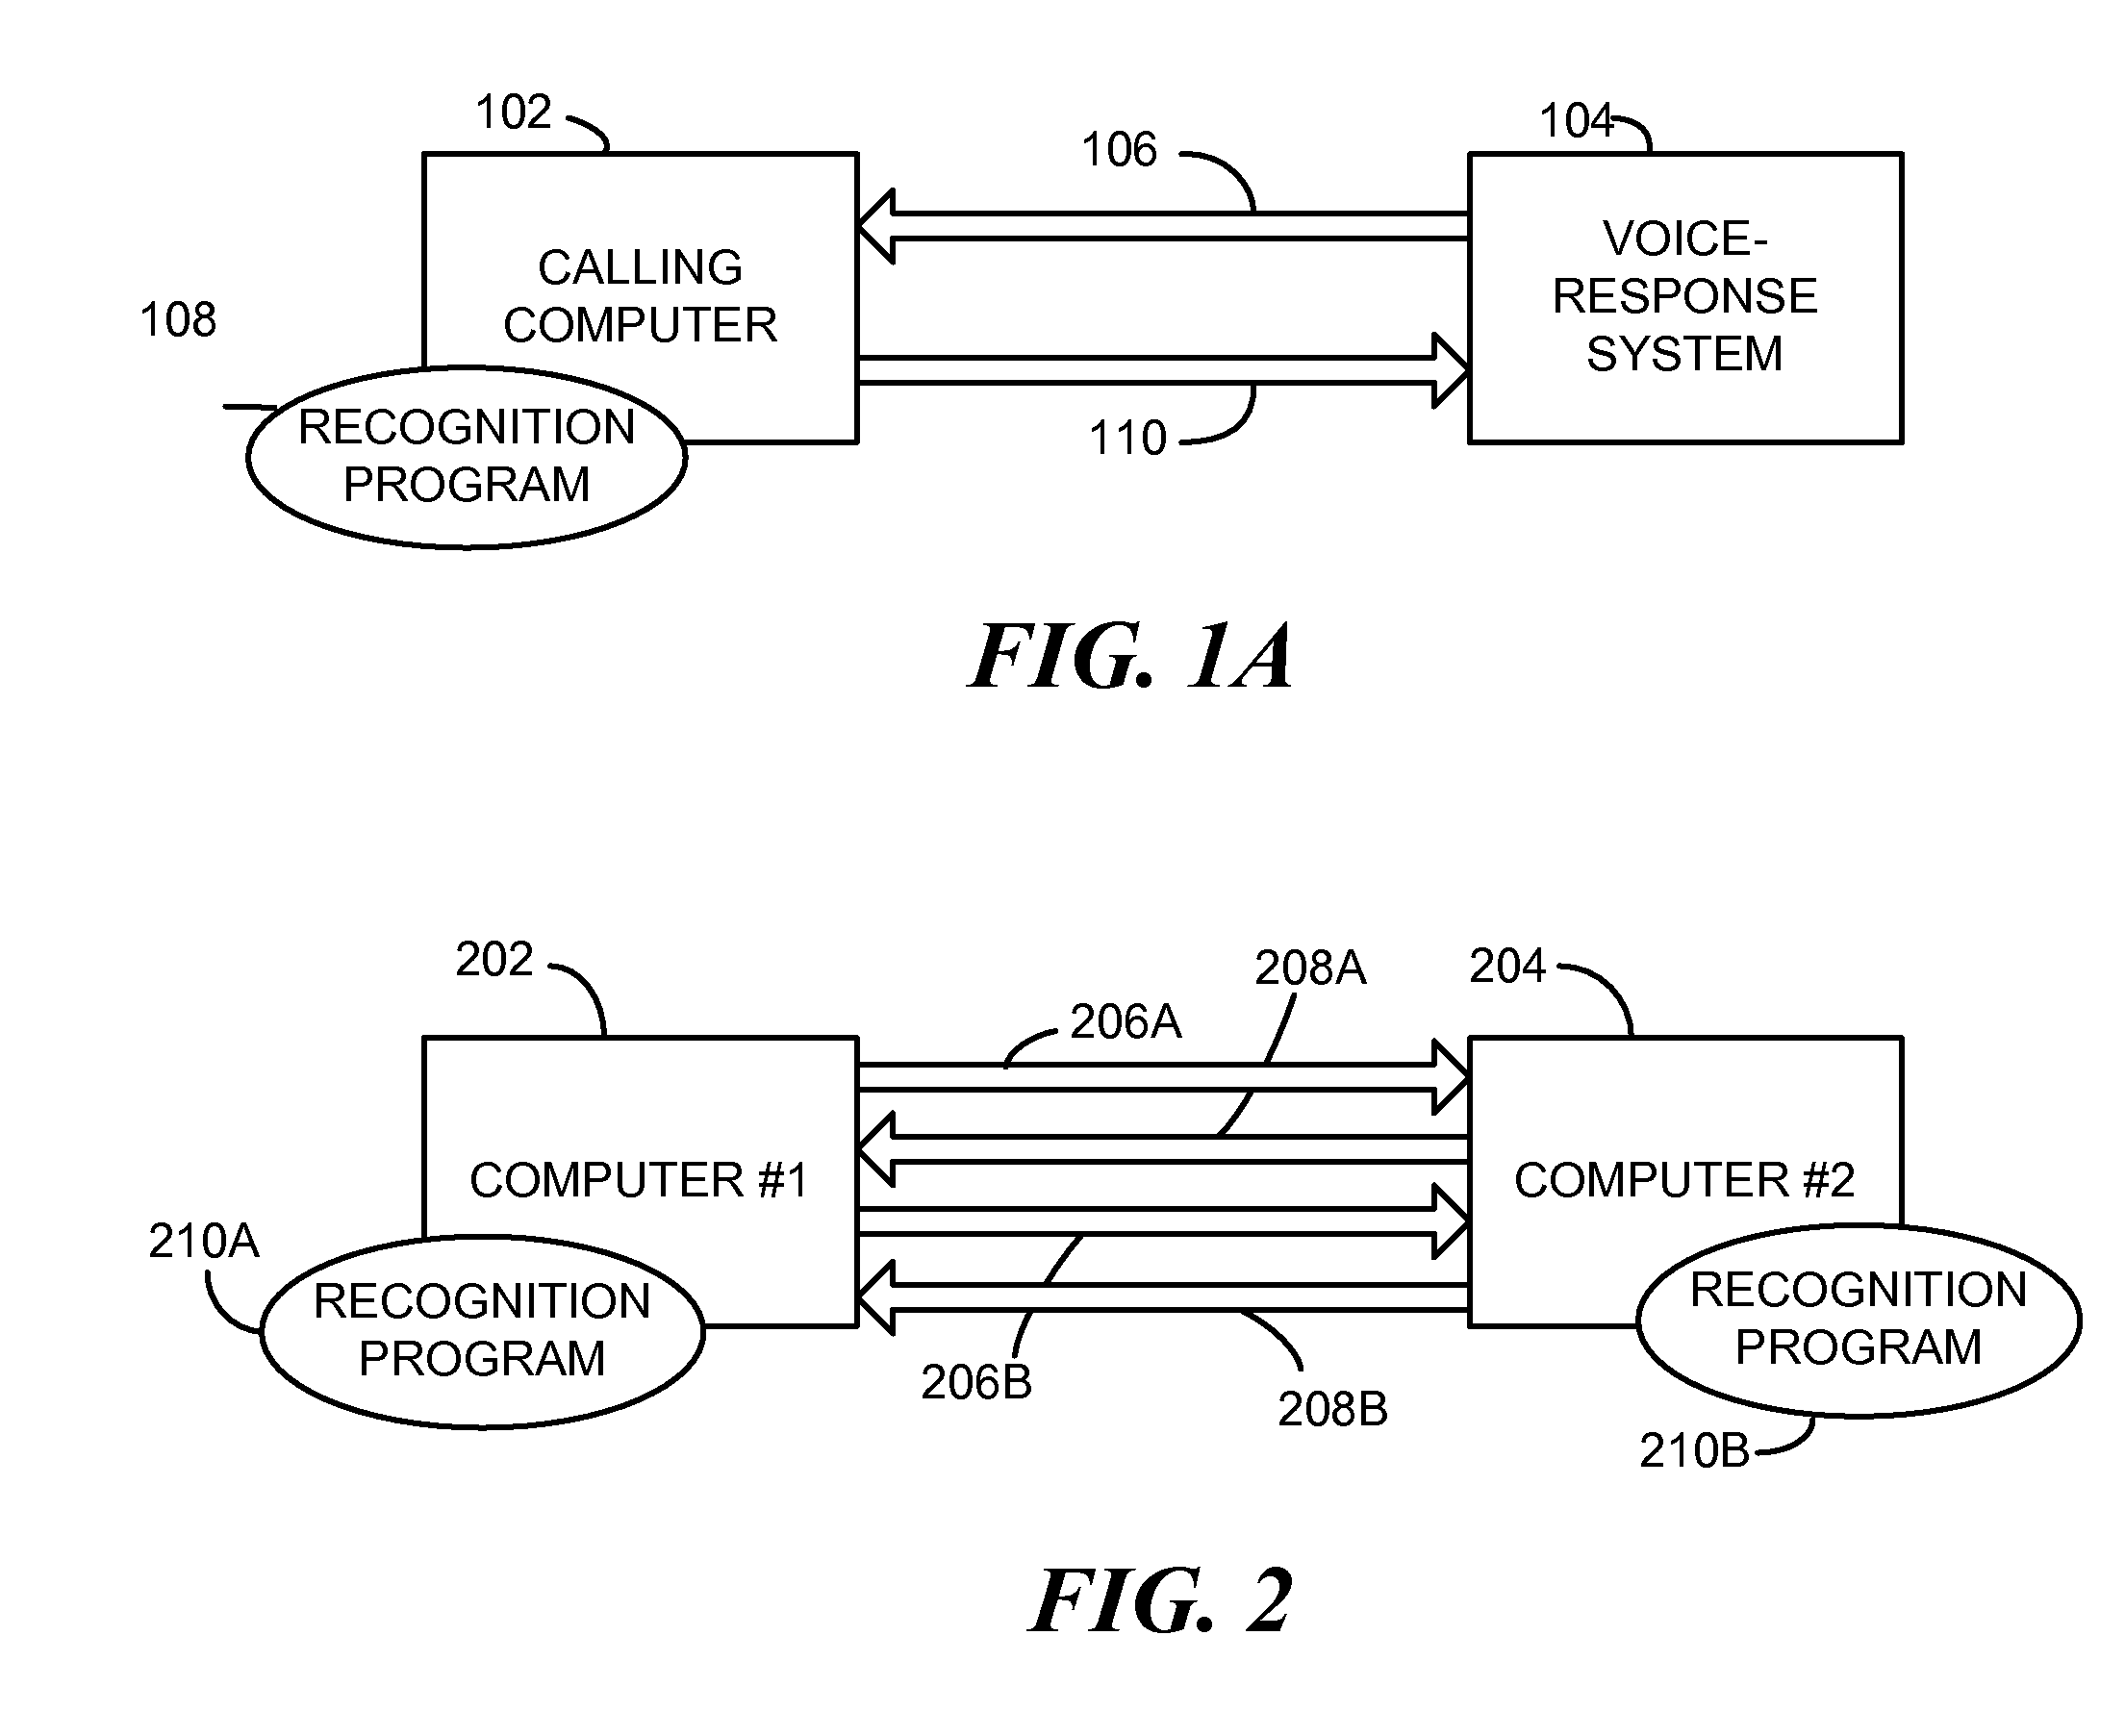 Closed-loop command and response system for automatic communications between interacting computer systems over an audio communications channel